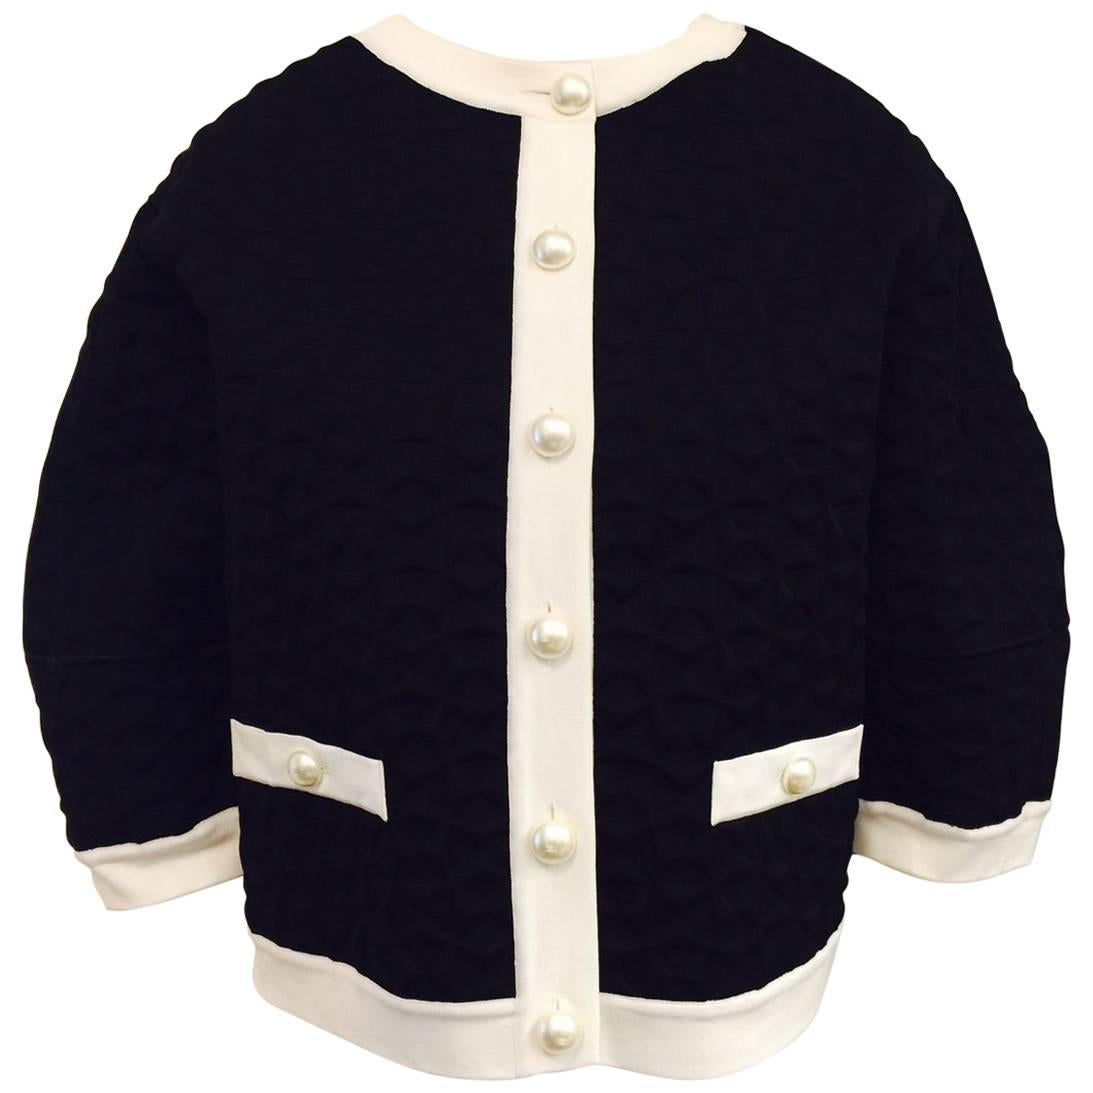 Chanel Black Architectural 3-Dimensional Quilted Jacket W Faux Pearl Buttons